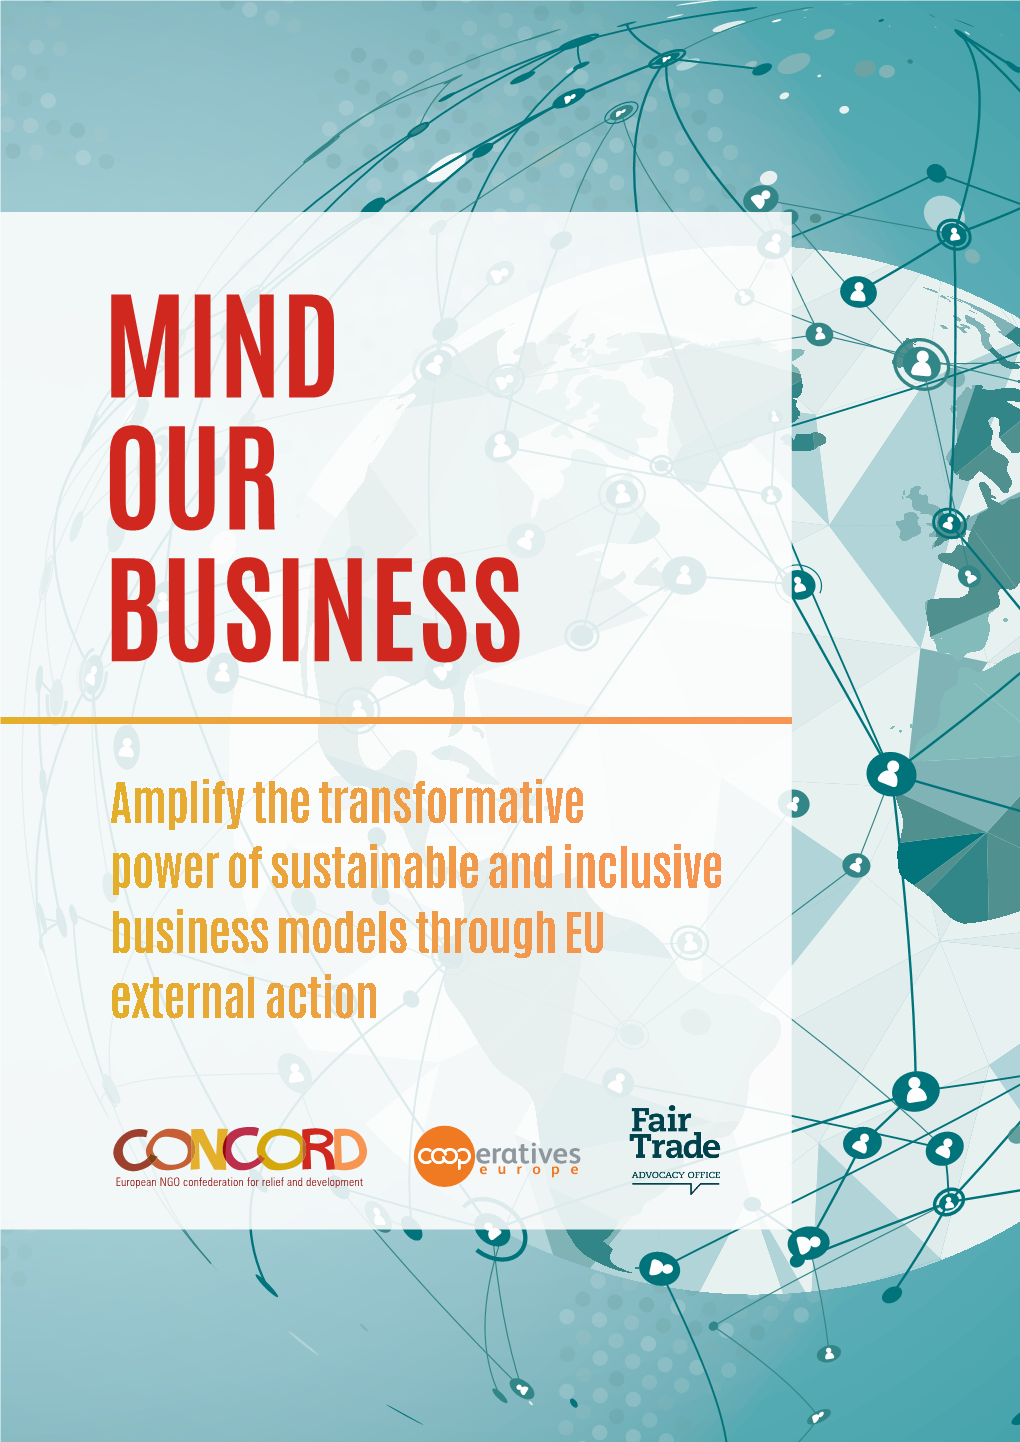 MIND OUR BUSINESS — Amplify the Transformative Power of Sustainable and Inclusive Business Models Through EU External